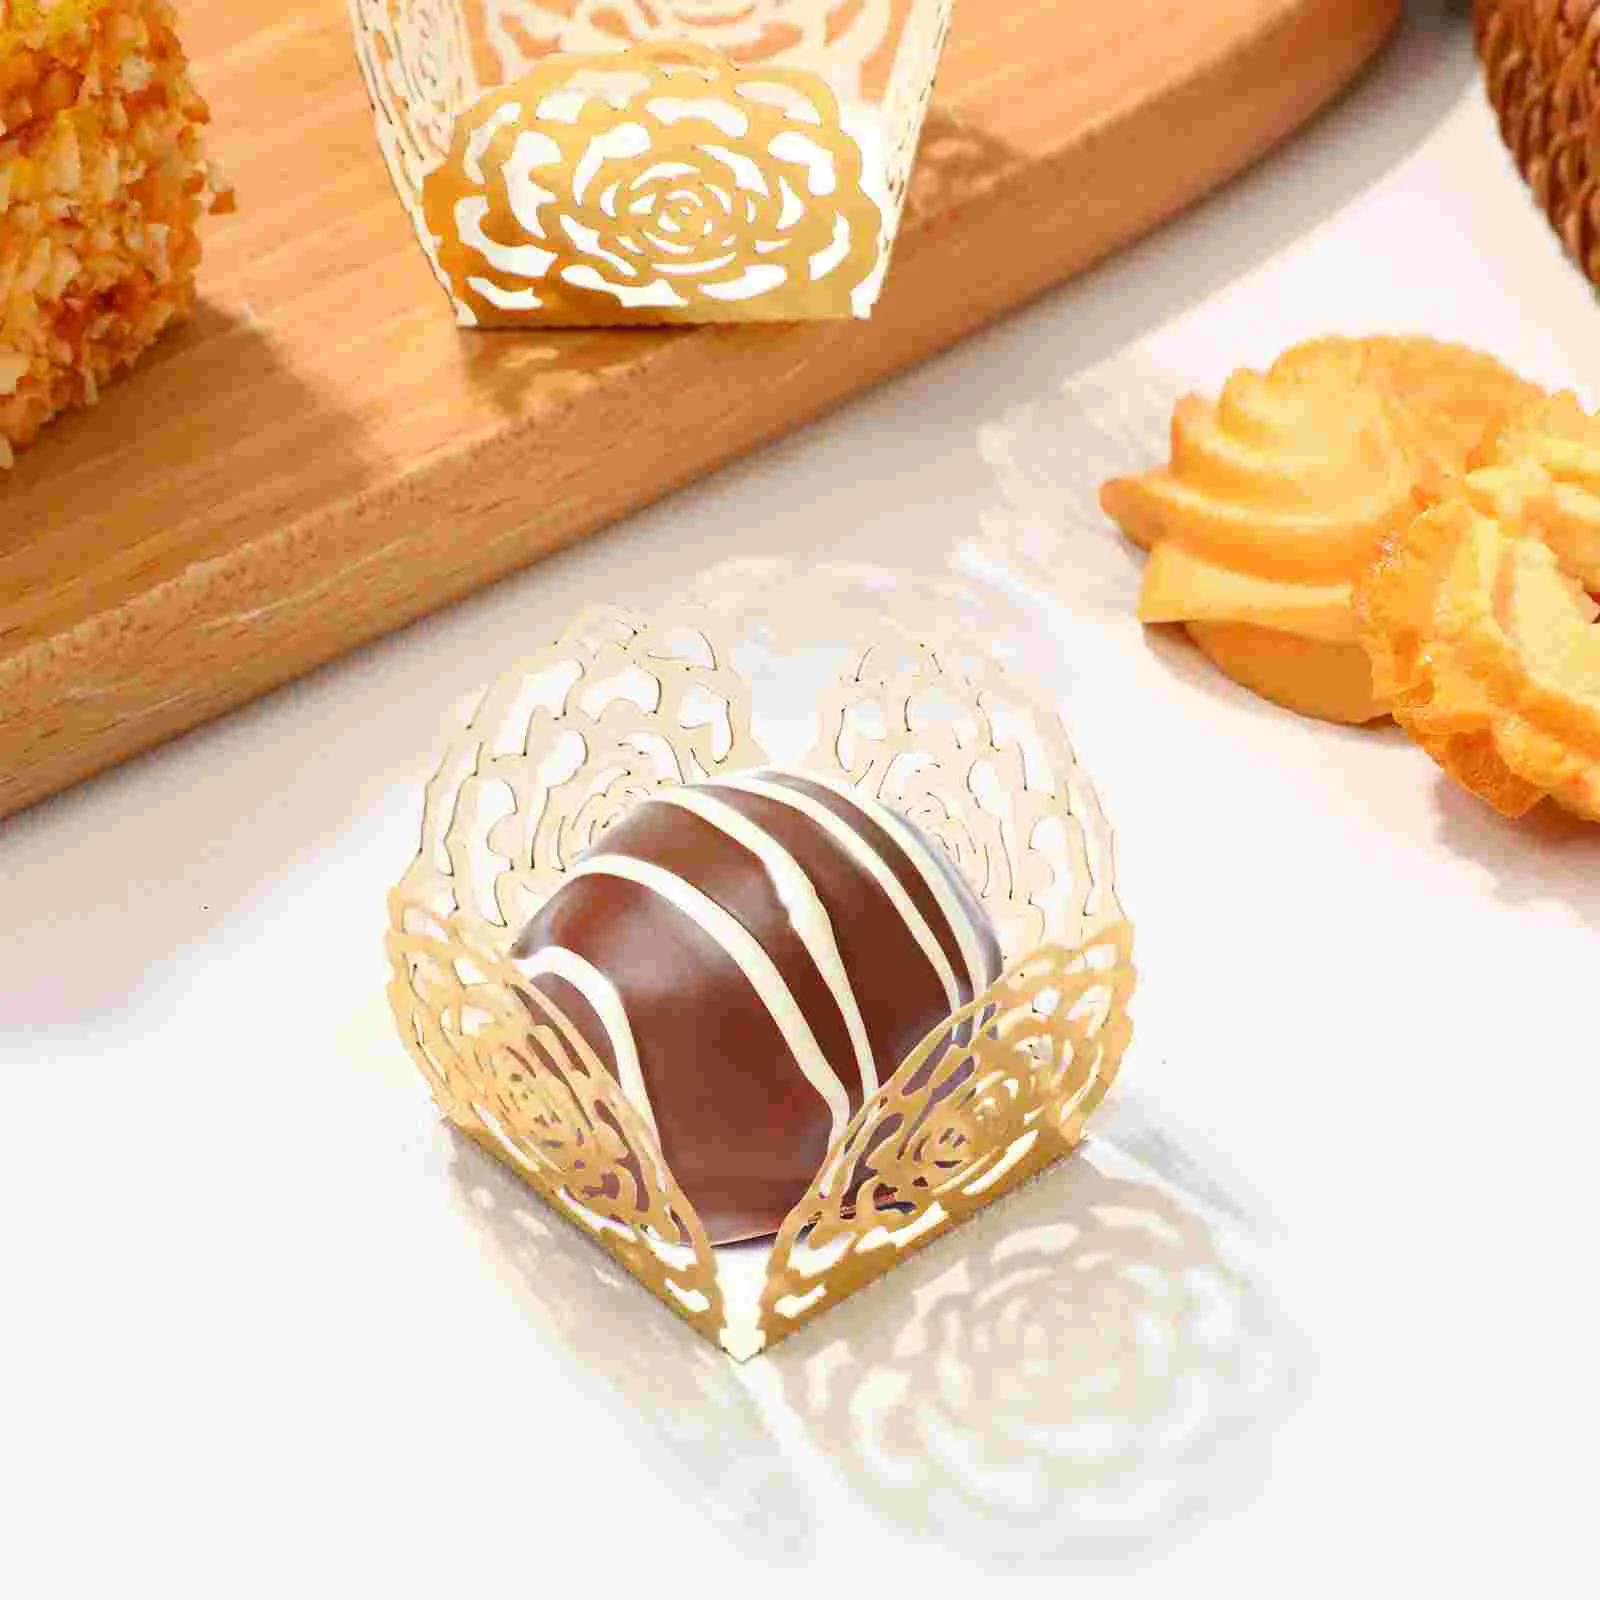 

50 Pcs Paper Truffle Wrappers Truffle Wrap Liners Hollow Design Candy Cups Chocolate Paper Liners Perfect for Muffins Chocolate